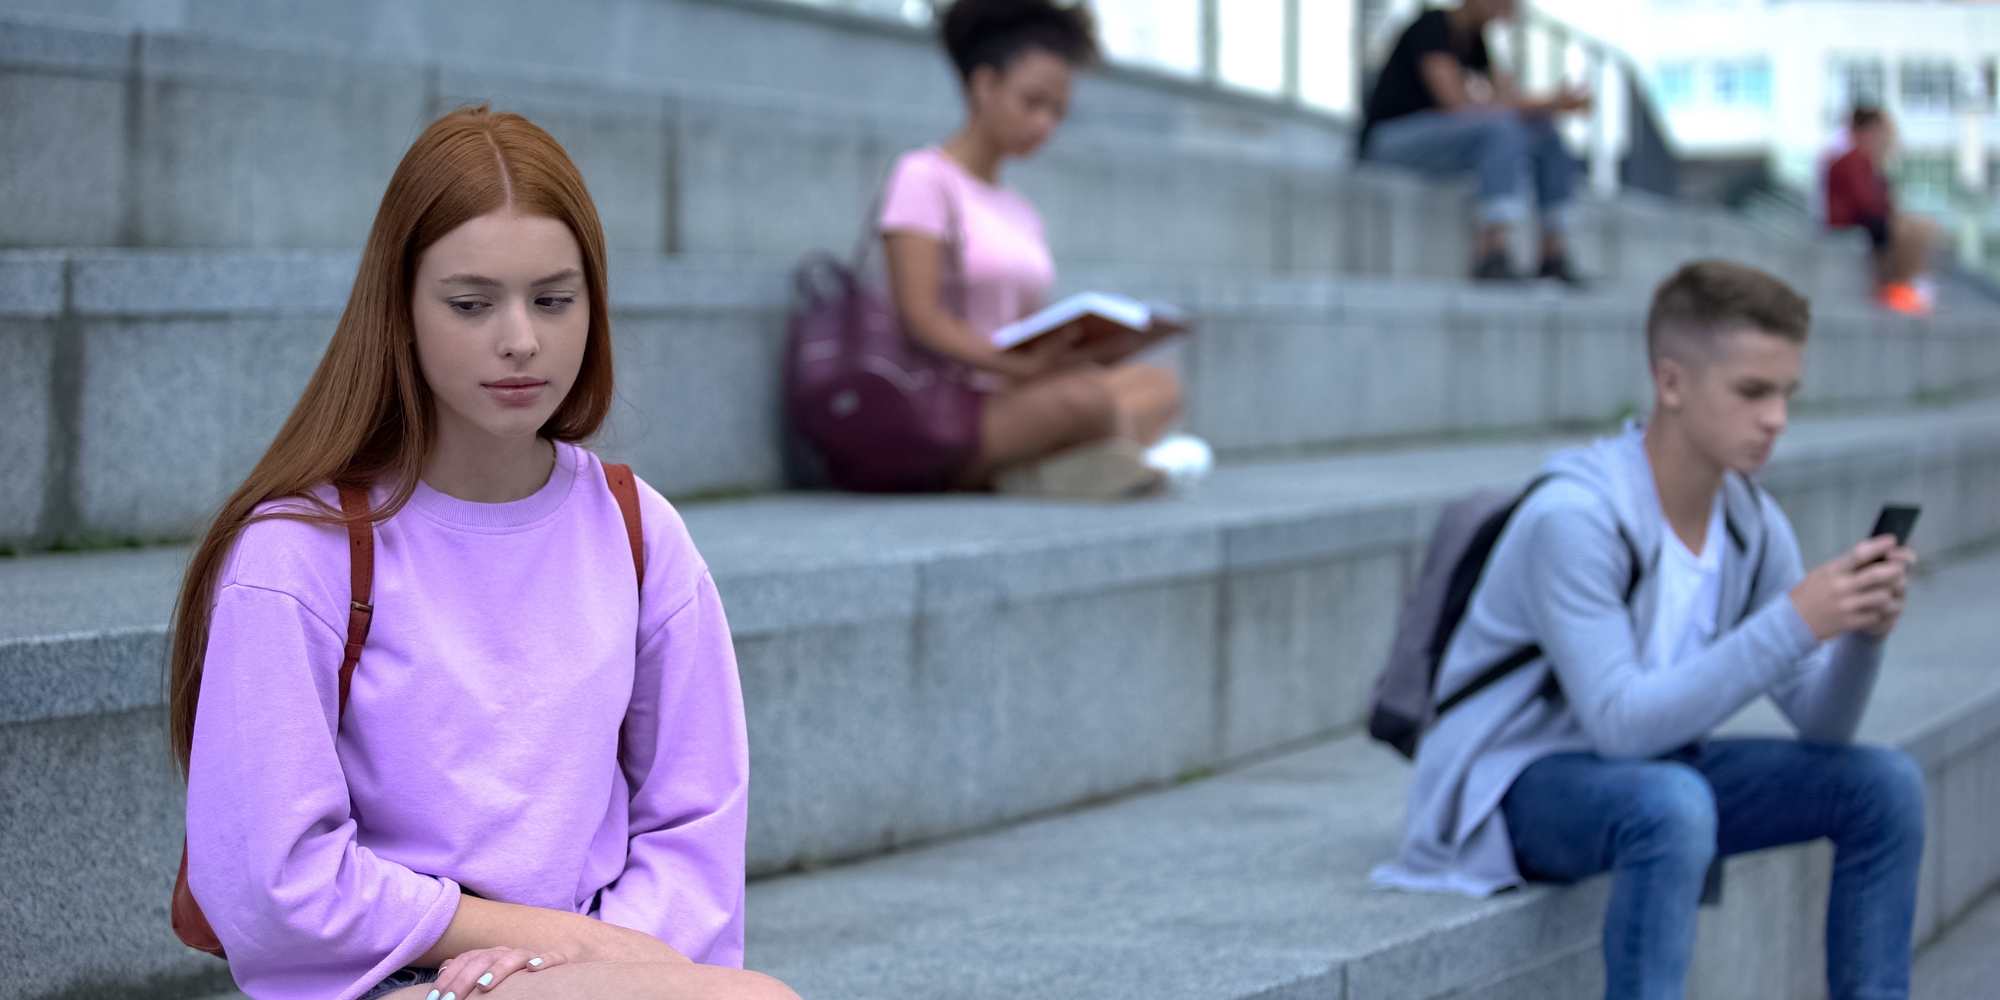 A young women with long red hair sits alone on some grey stone steps, looking downcast. In the background, other young adults sit by themselves, either on their mobile phones or reading.